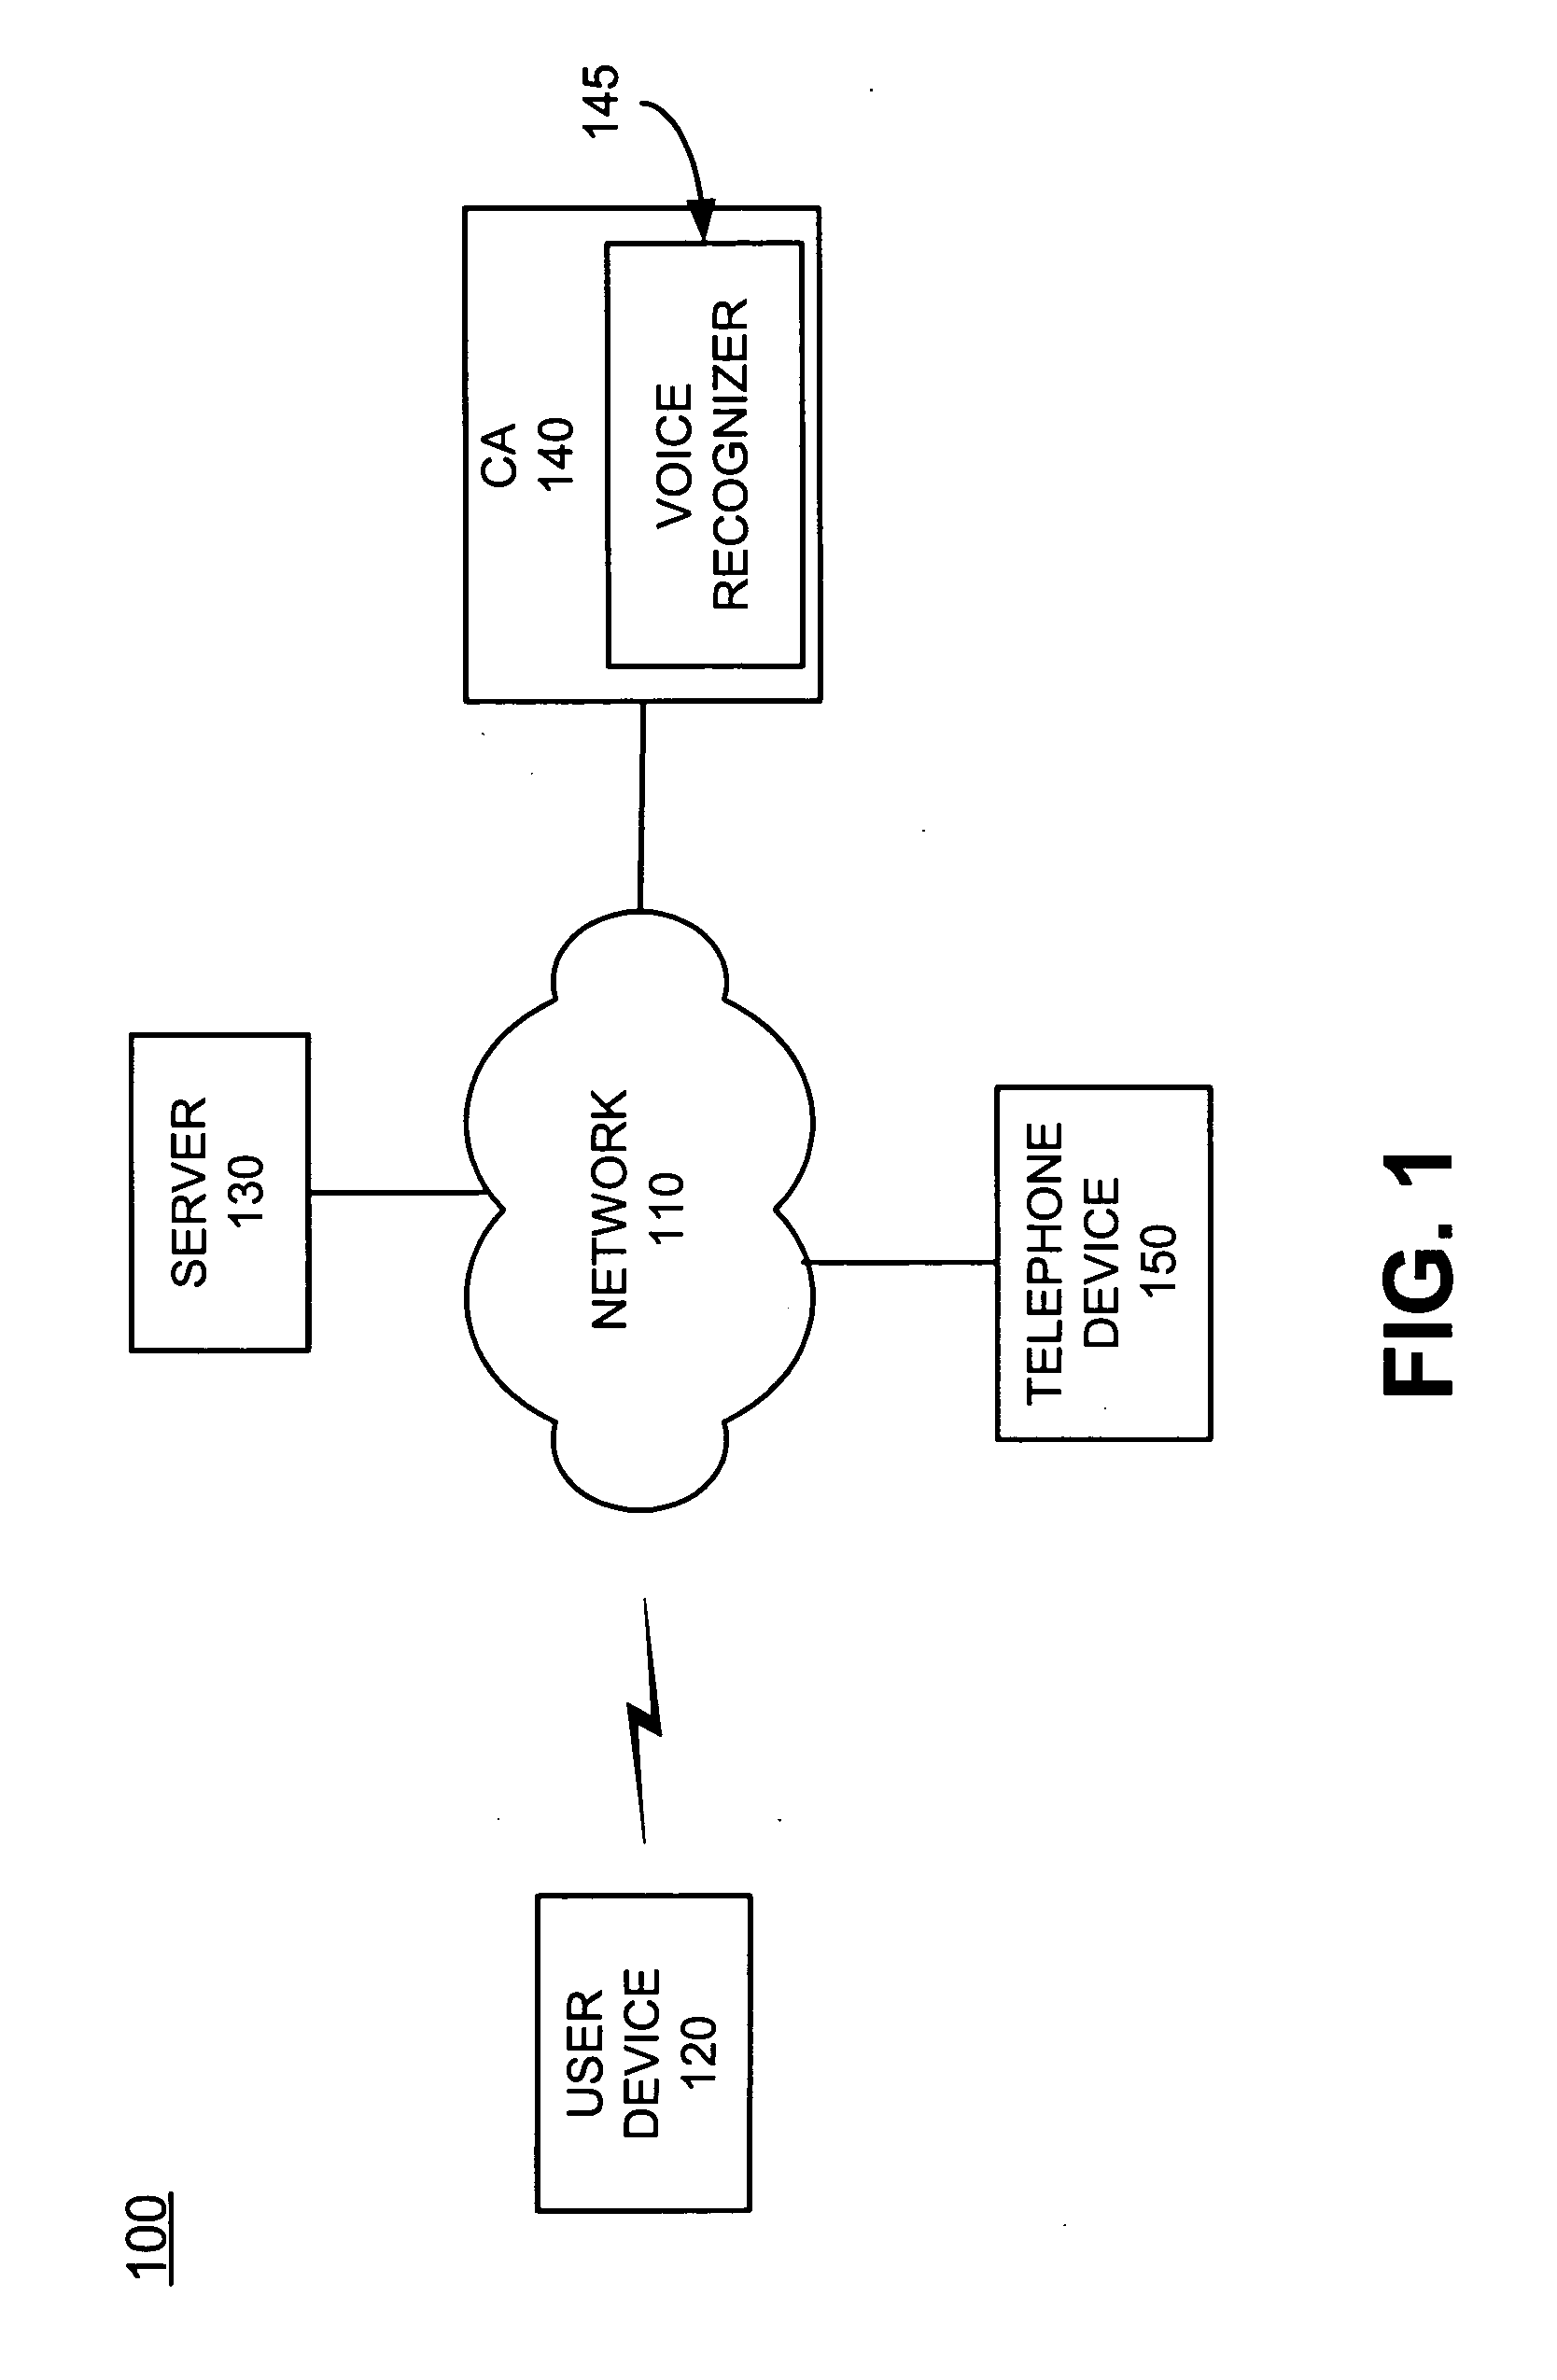 Systems and methods for facitating communications involving hearing-impaired parties